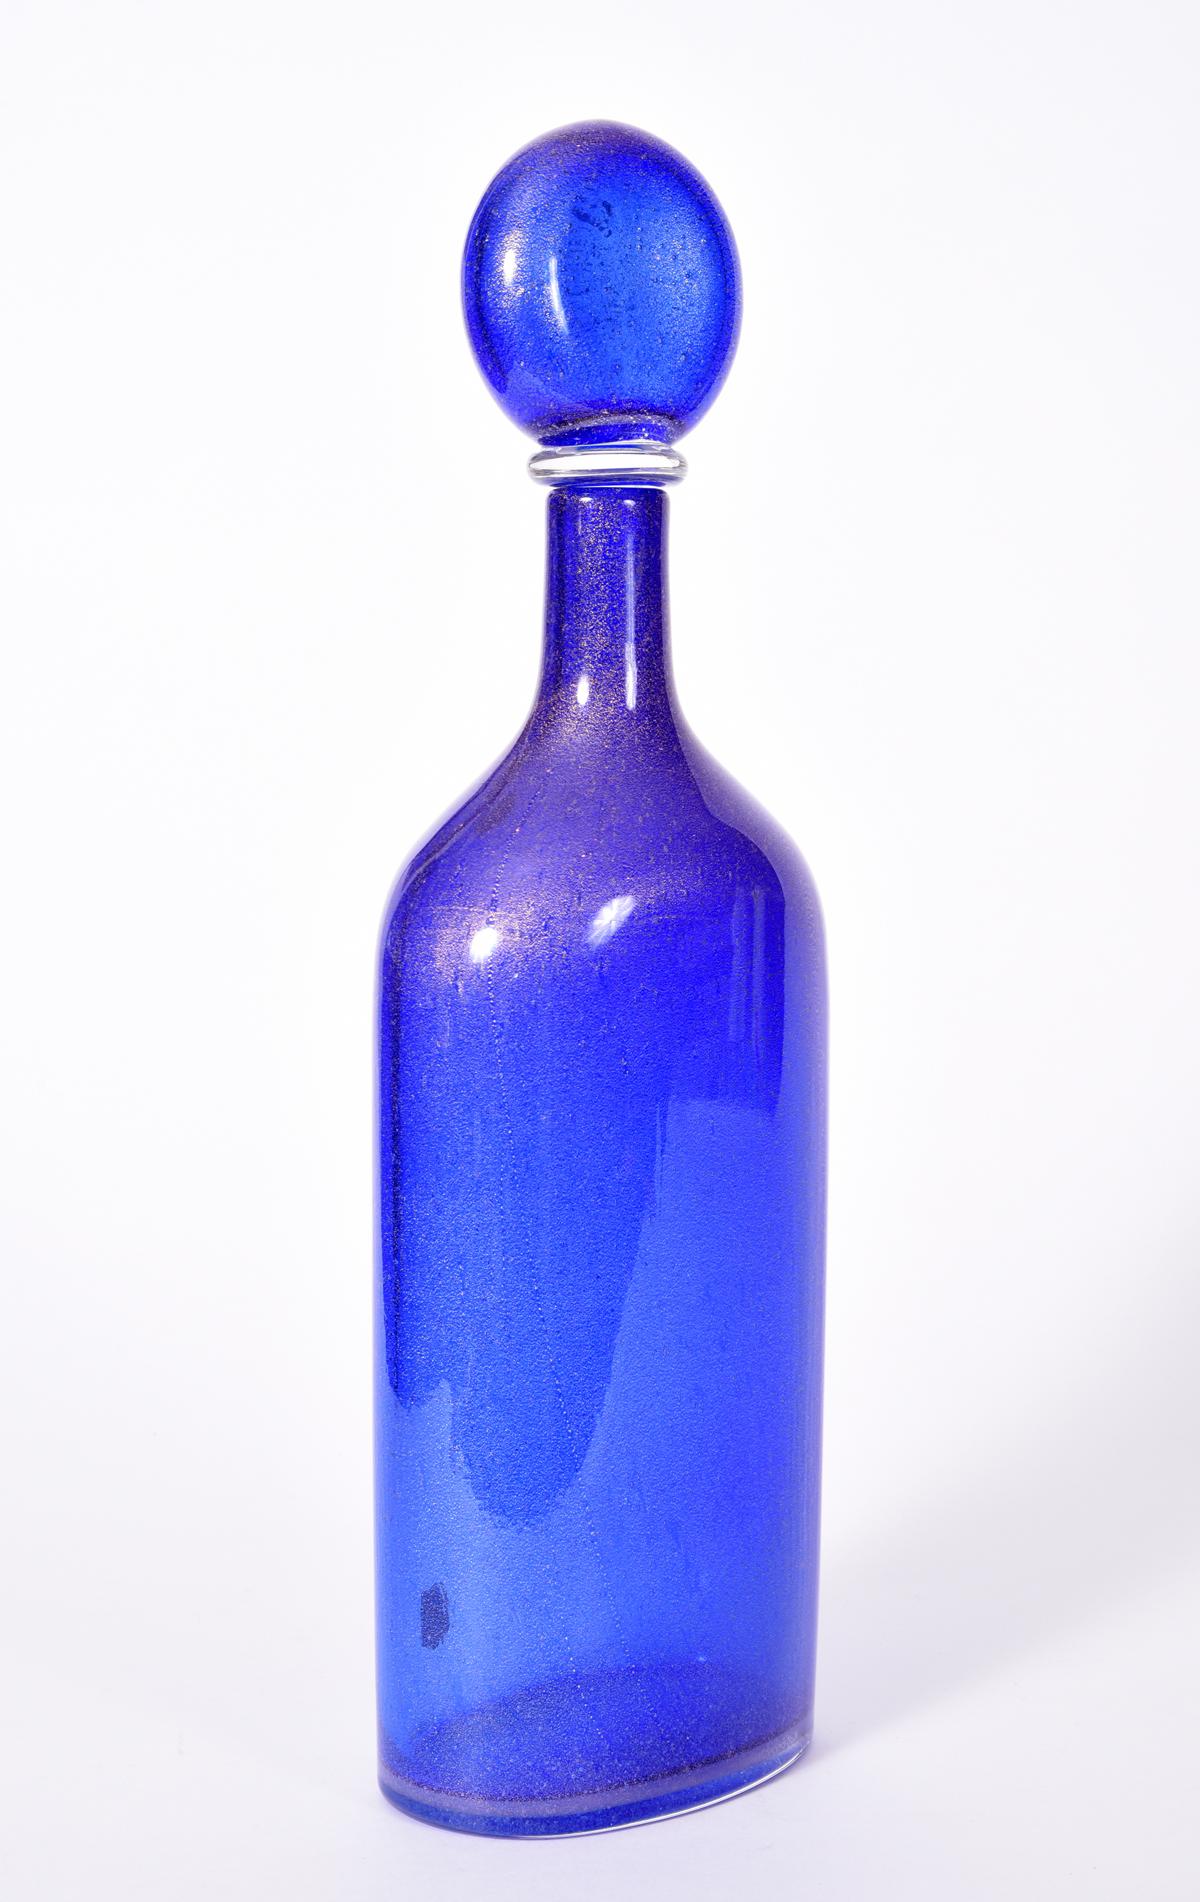 Mid-20th century cobalt blue with gold fleck details barware / tableware Murano glass decanter. The decanter is in great condition, maker's mark undersigned. The decanter stand about 16.5 inches x 5.5 inches x 3 inches.